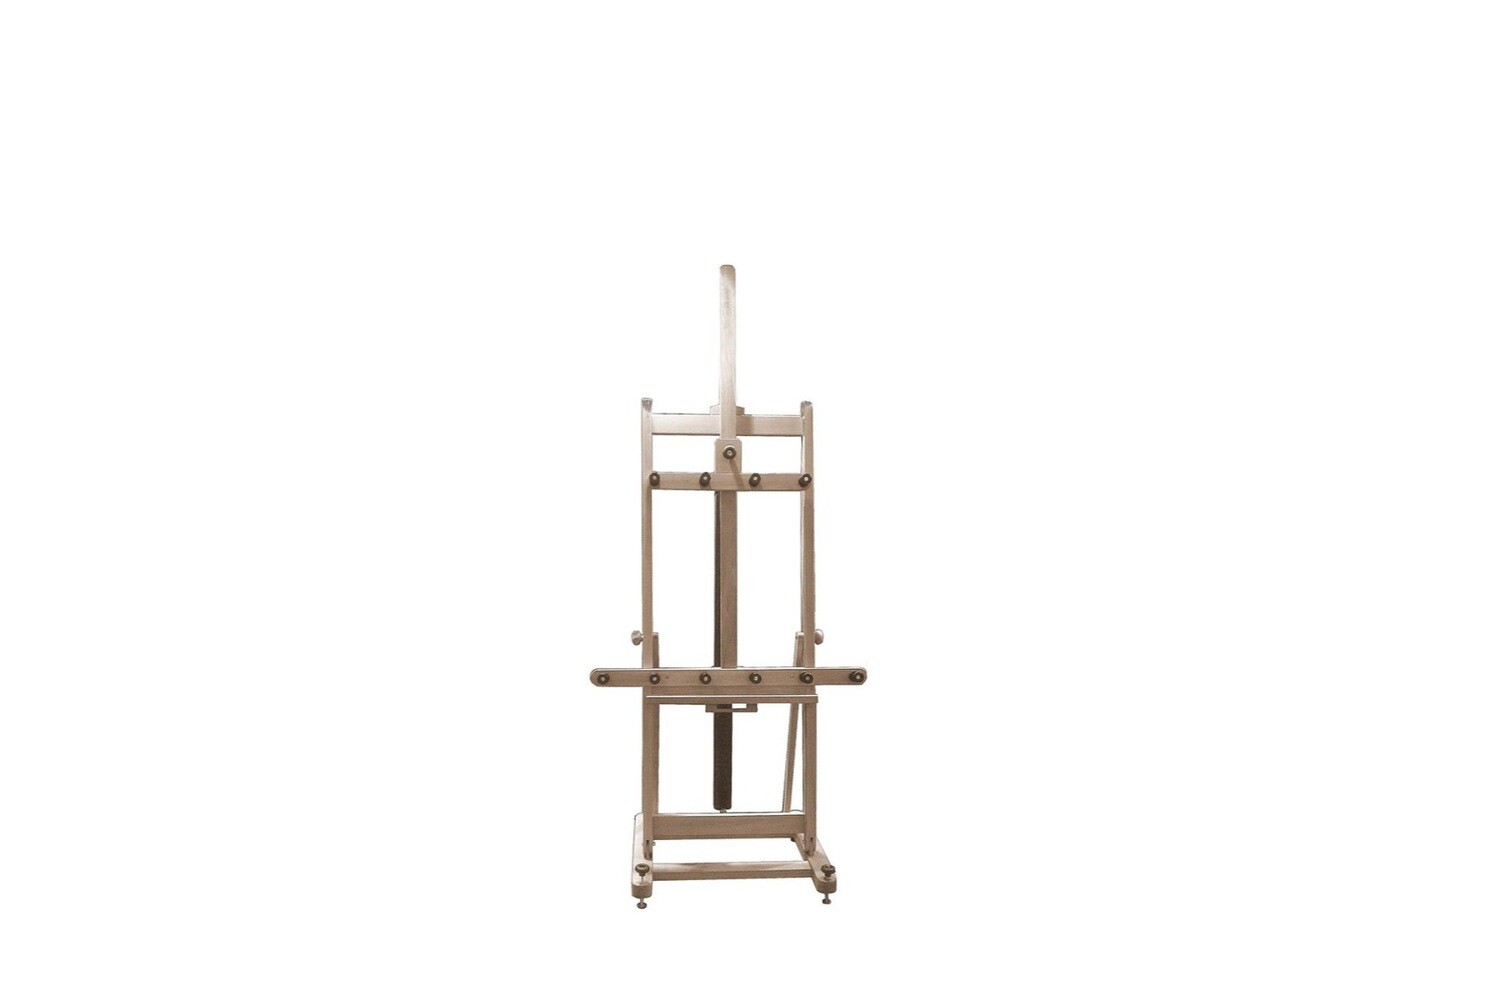 CS-270 ◦ Studio easel with counterbalance system